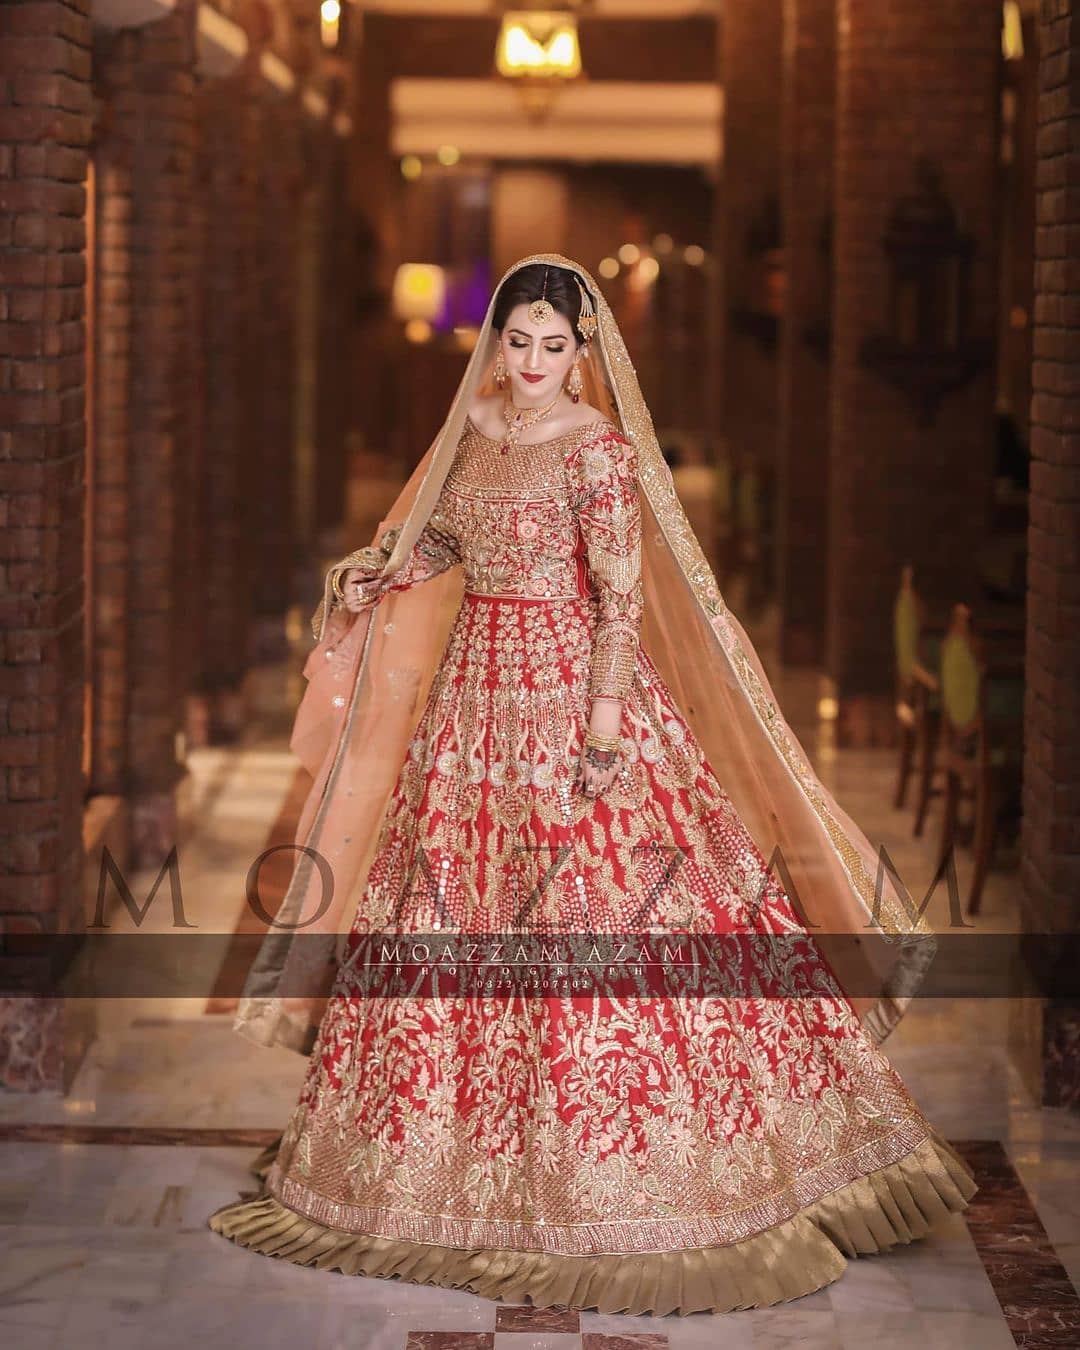 Bridal in Red Dress 2020